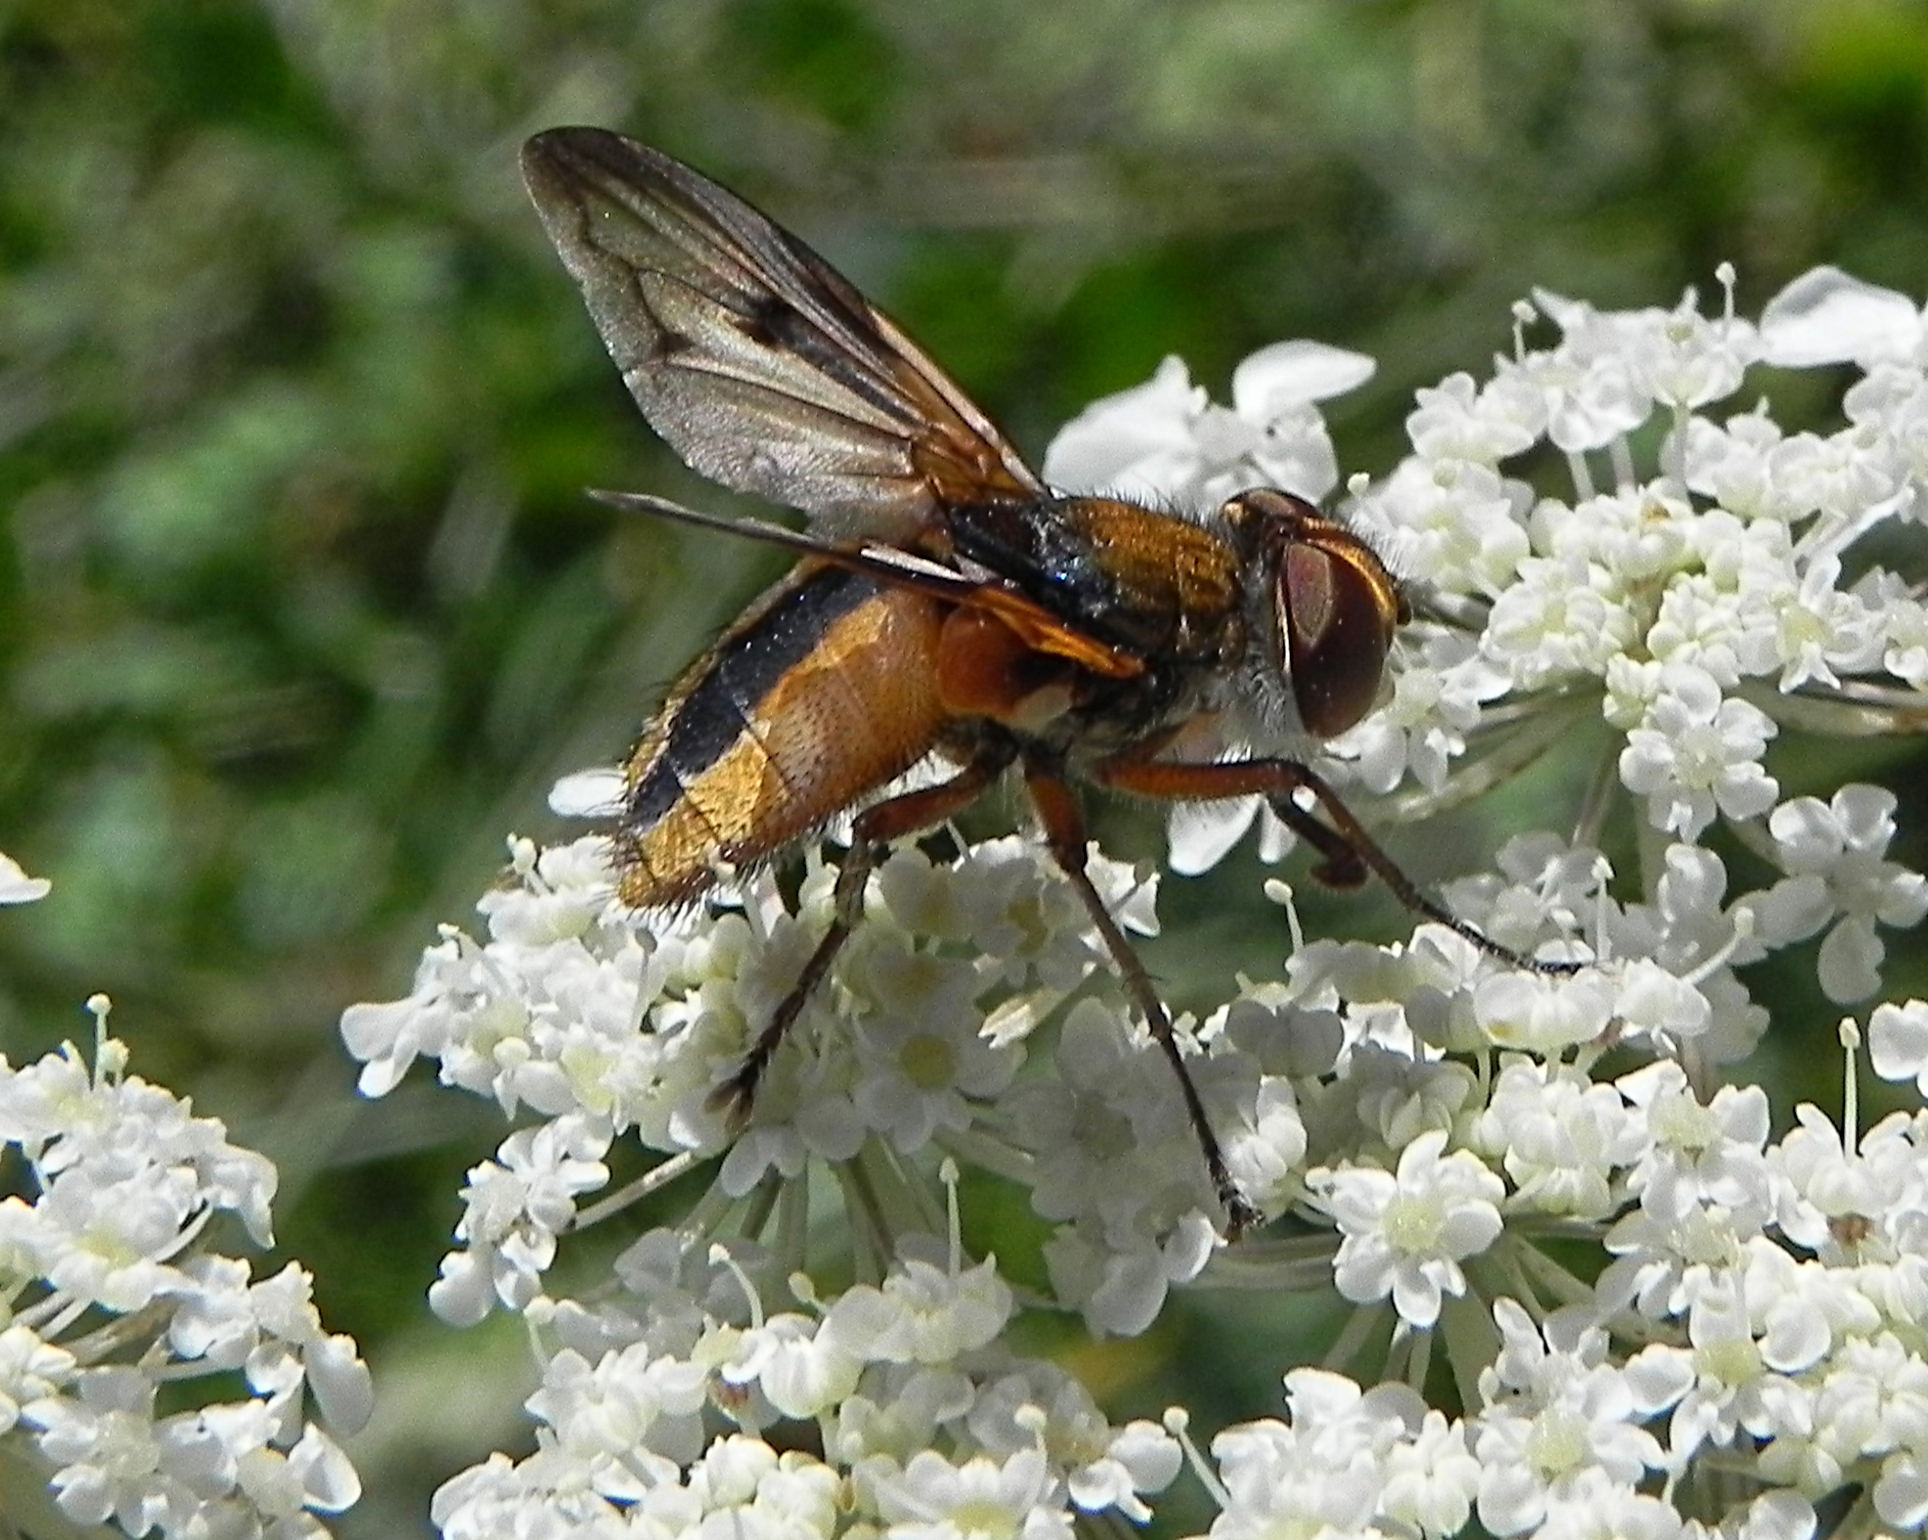 Fam. Tachinidae. Italia, Appennines, Gran Sasso, 12 Aug 2014. Provided by Paolo to children for didactics, but not shot with them.